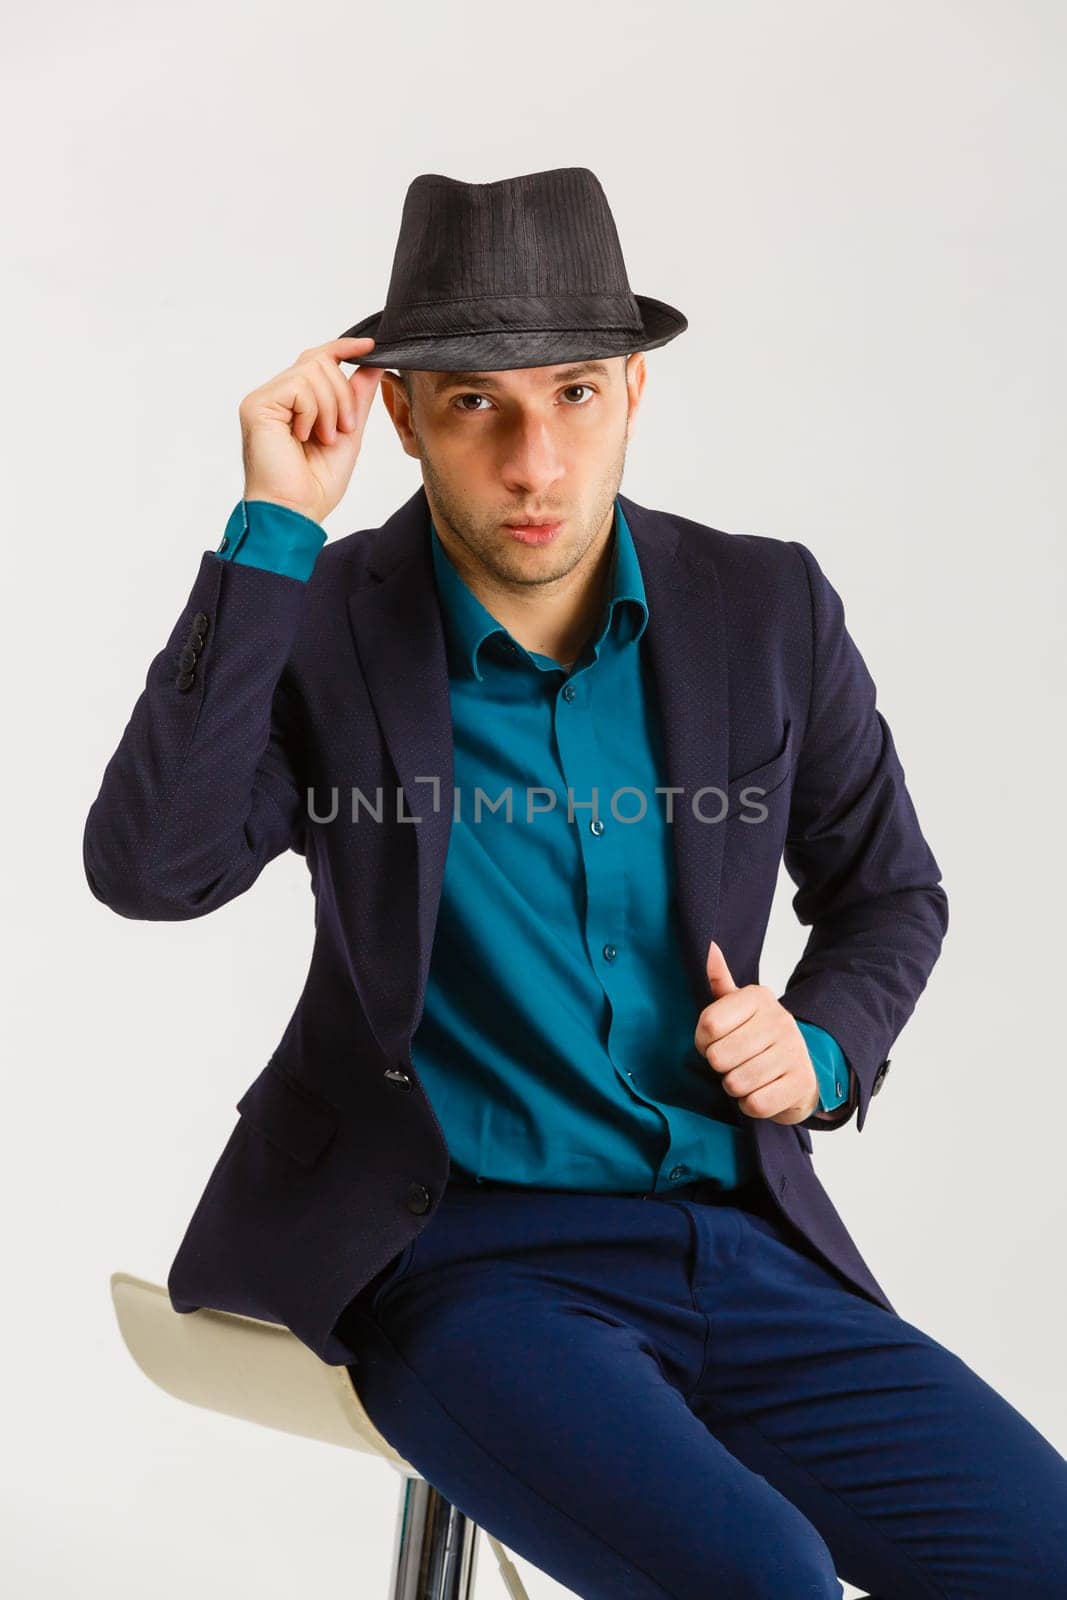 Confident middle-aged wealthy man dressed in retro style suit with hat.